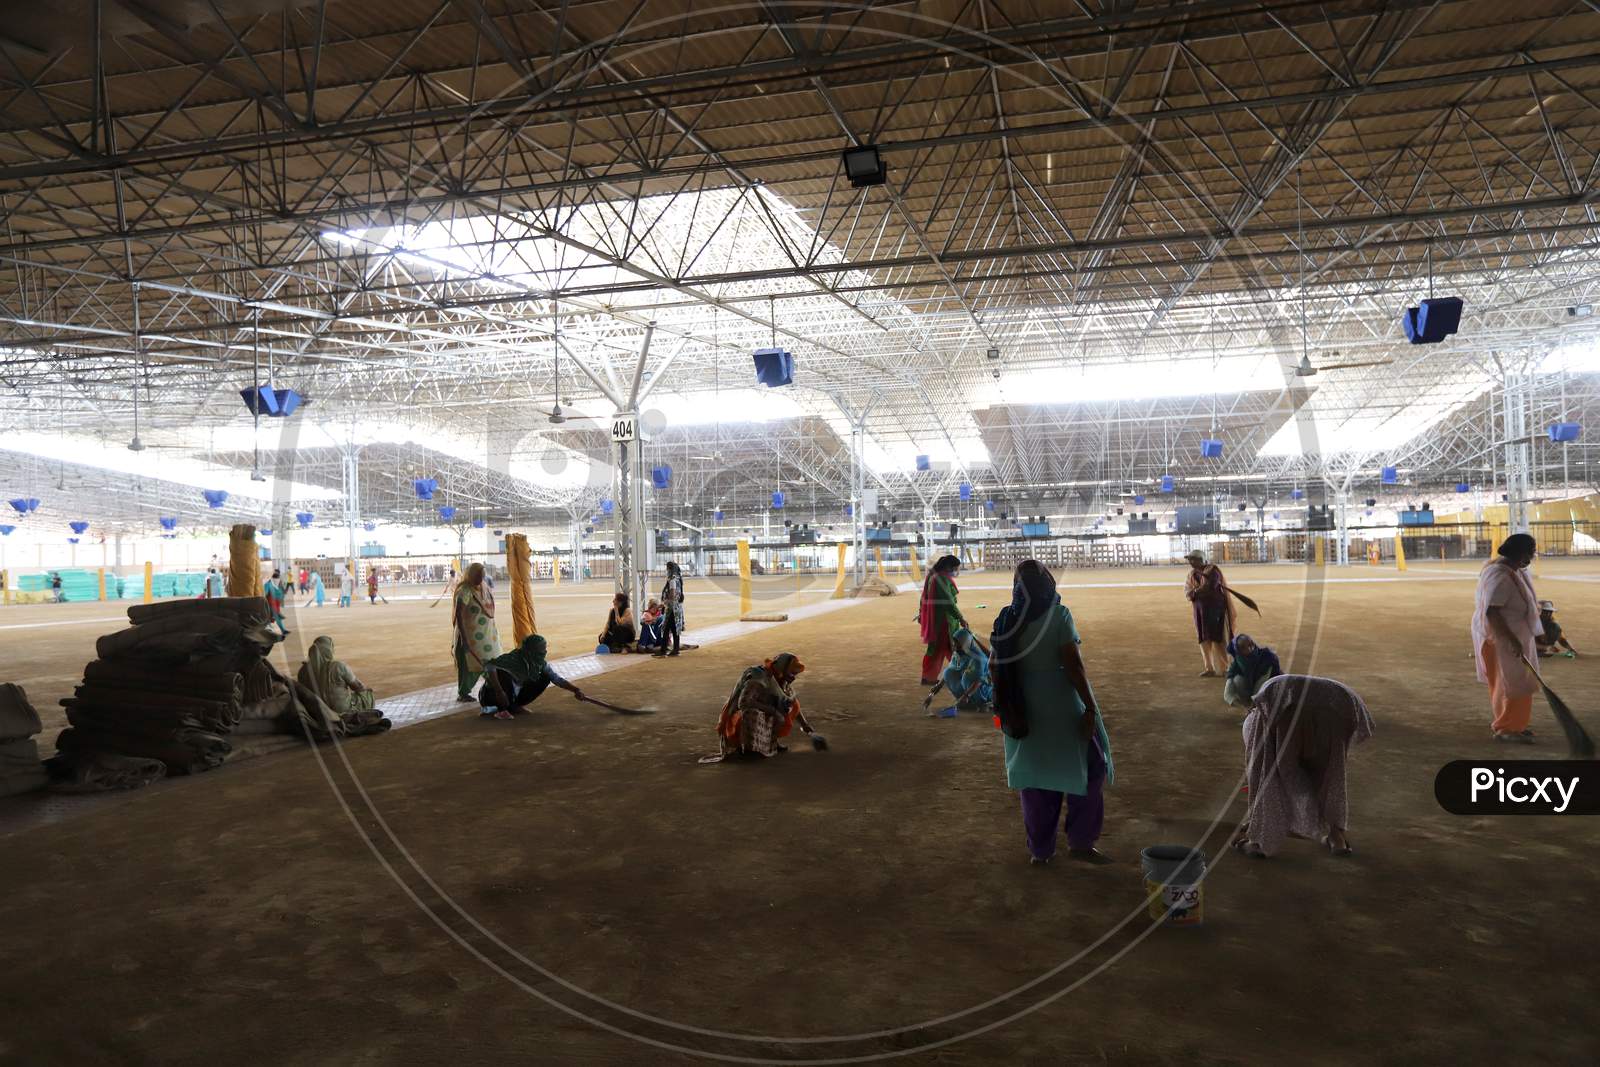 Volunteers Sweeping The Floor Inside The Covid-19 Care Centre At Radha Soami Satsang Beas As They Prepare A Facility That Can Accommodate More Than Ten Thousand Covid-19 Patients, One Of The Biggest In India, In Chattarpur, On June 26, 2020 In New Delhi, India.